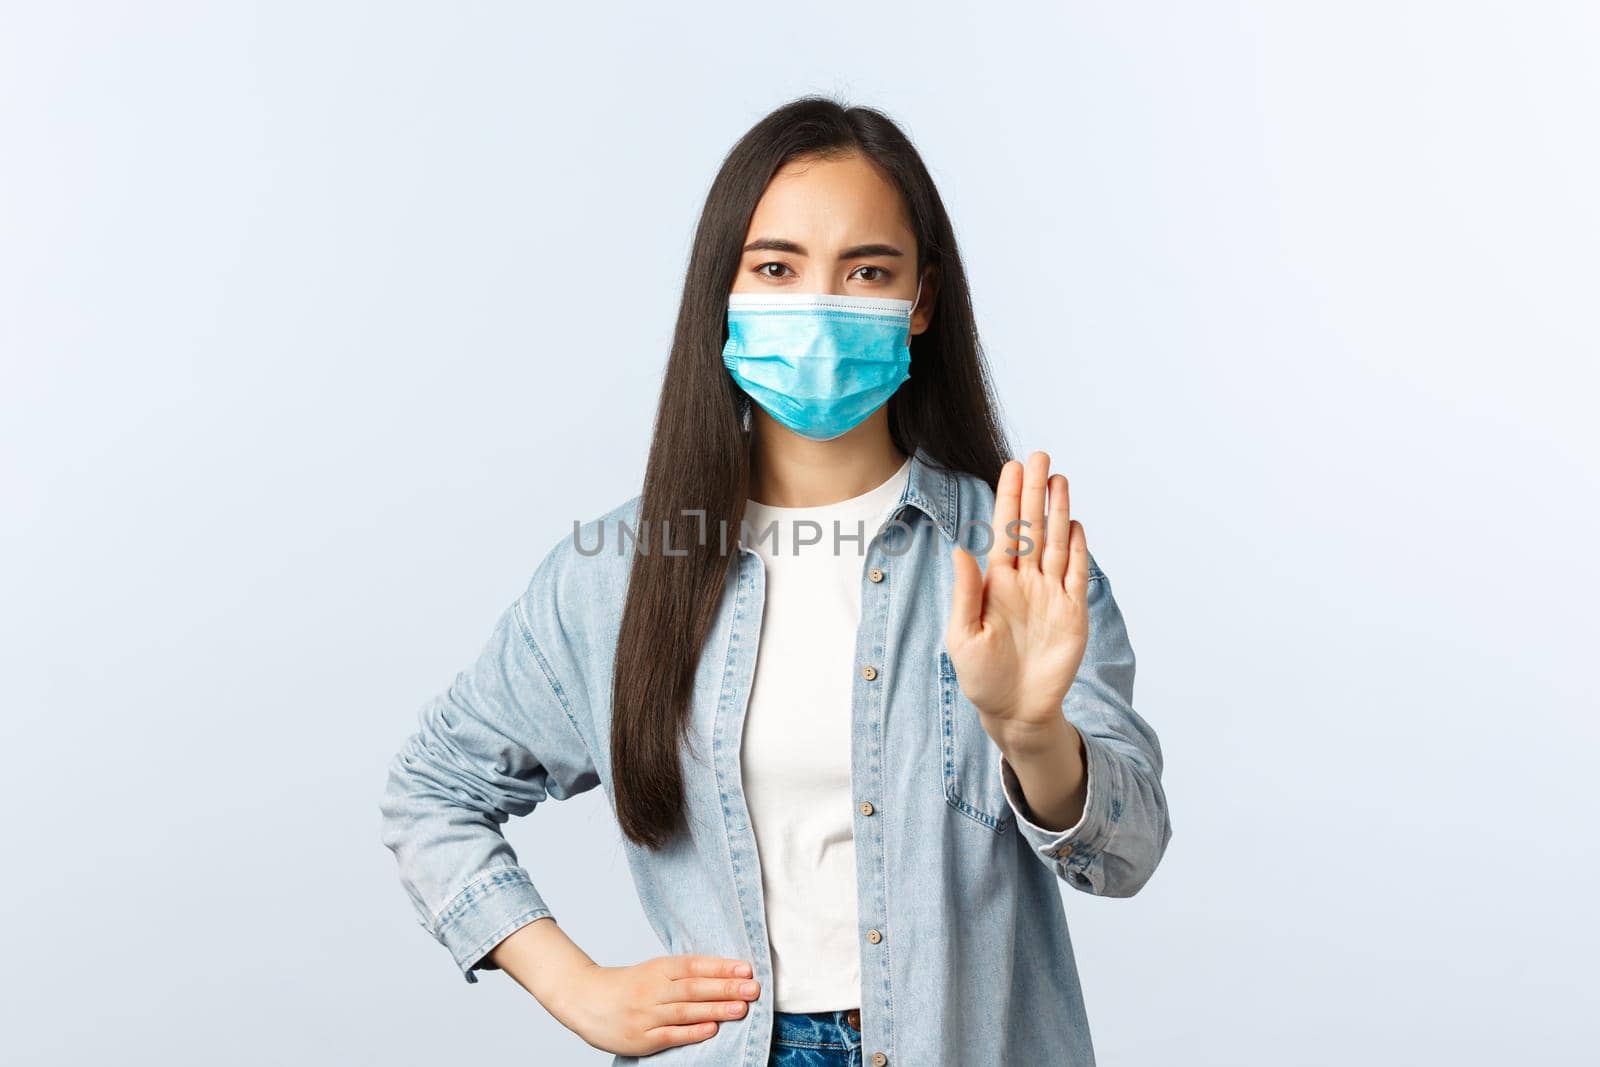 Social distancing lifestyle, covid-19 pandemic everyday life and leisure concept. Serious-looking asian girl show stop gesture, keep distance during coronavirus, wear medical mask.